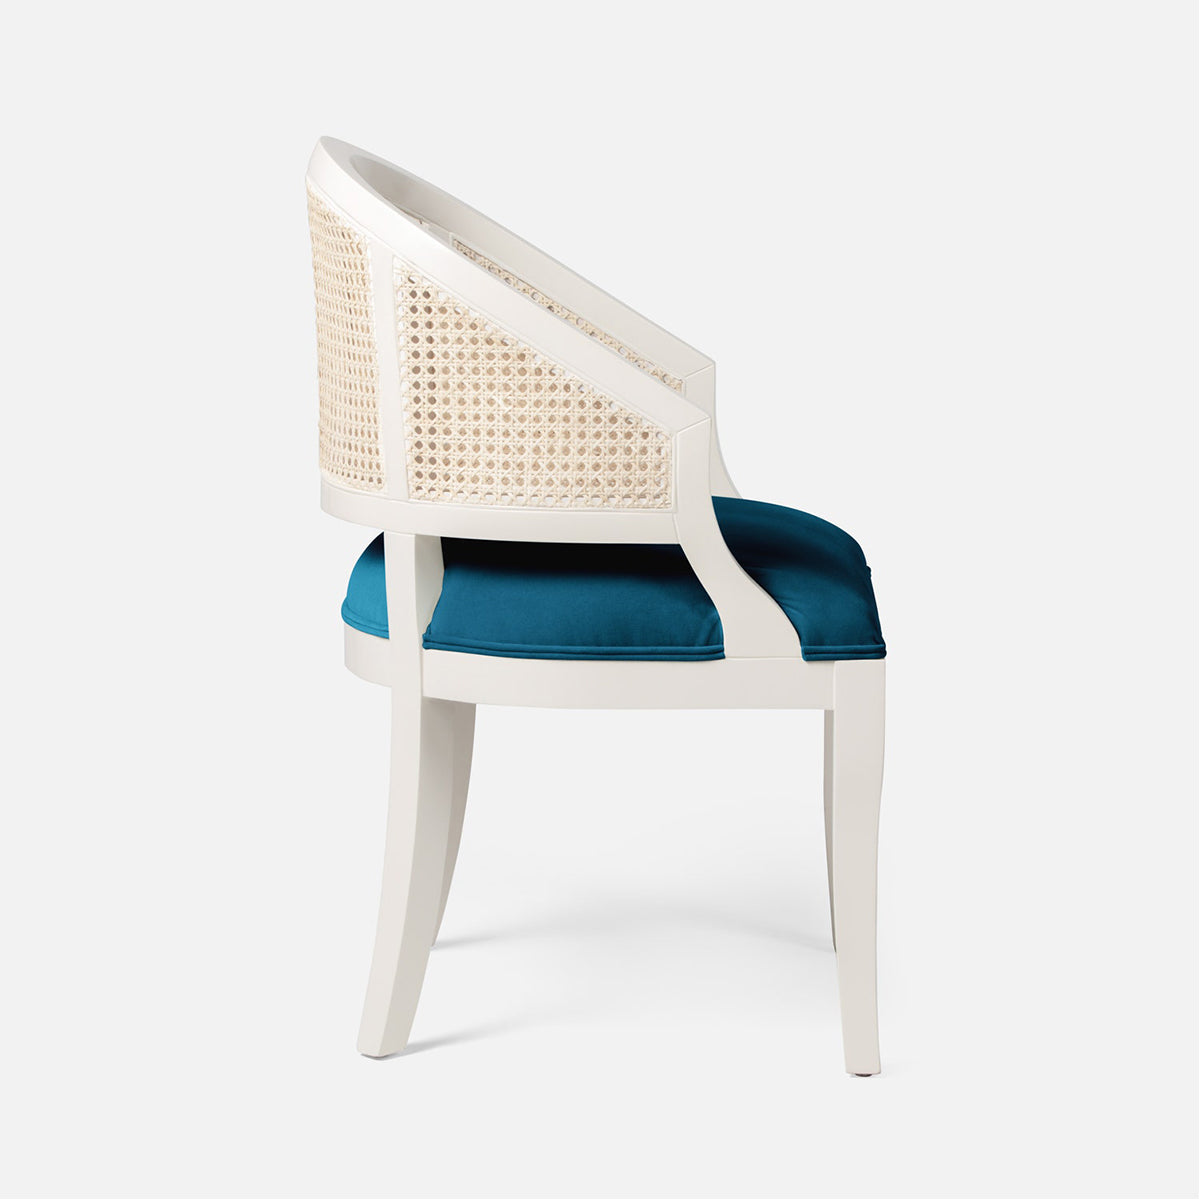 Made Goods Sylvie Curved Cane Back Dining Chair in Pagua Fabric